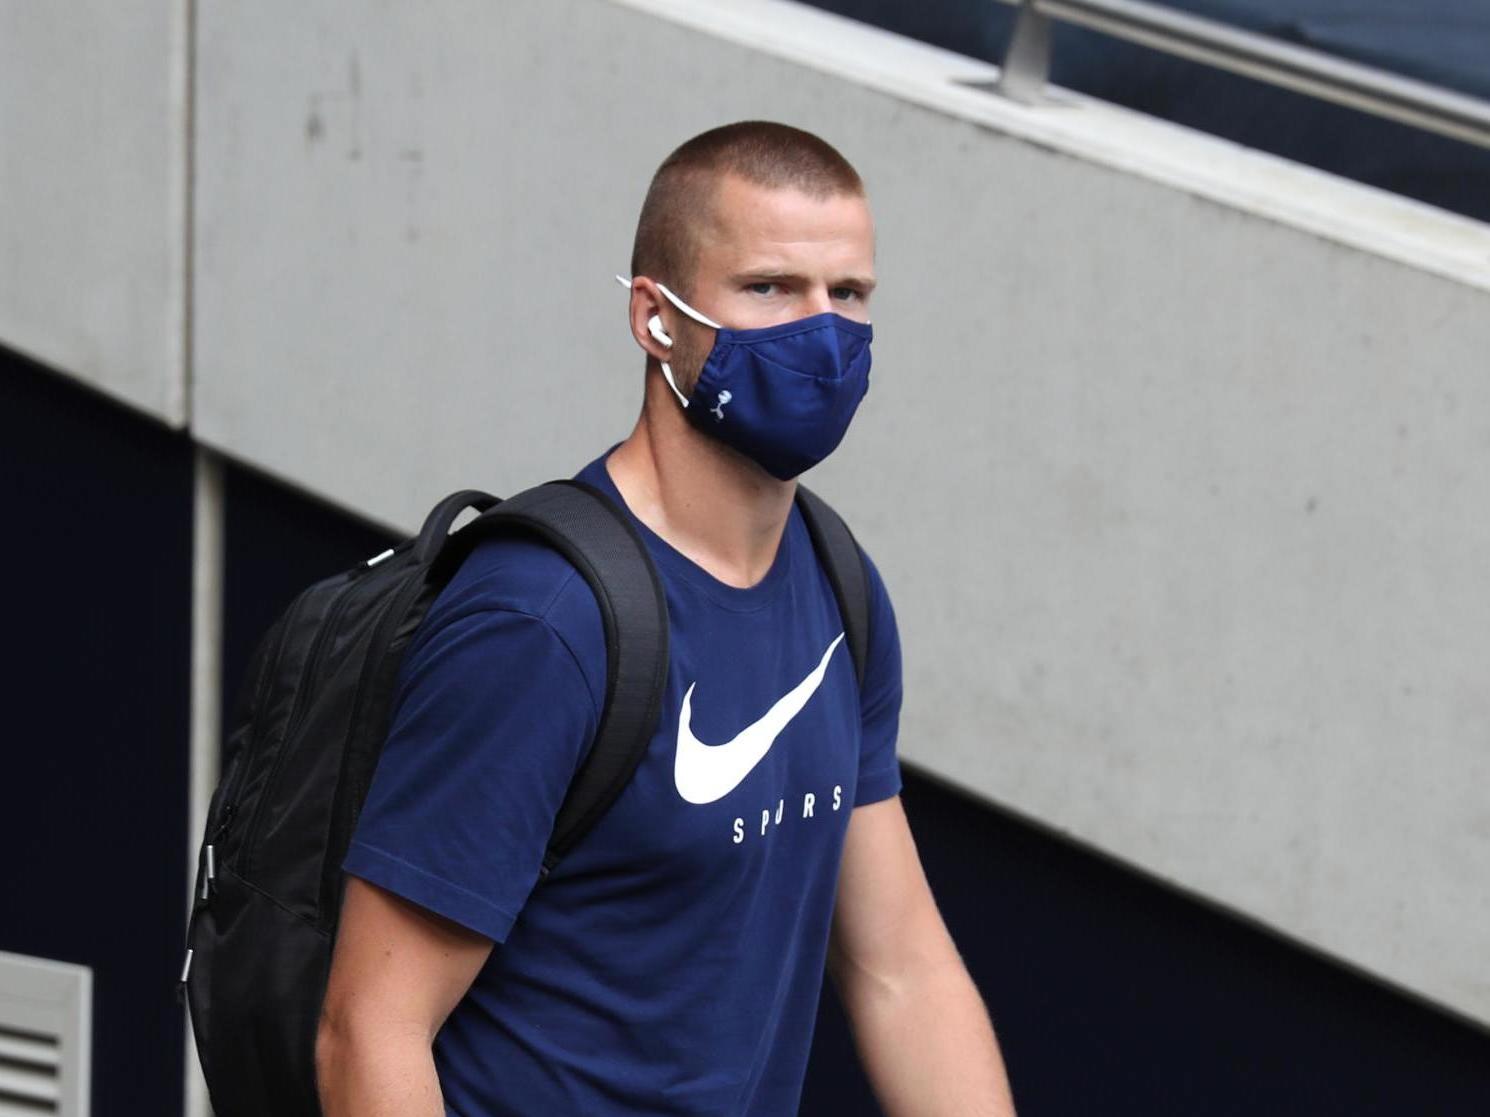 Jose Mourinho hopes Eric Dier will sign new long-term contract at Tottenham